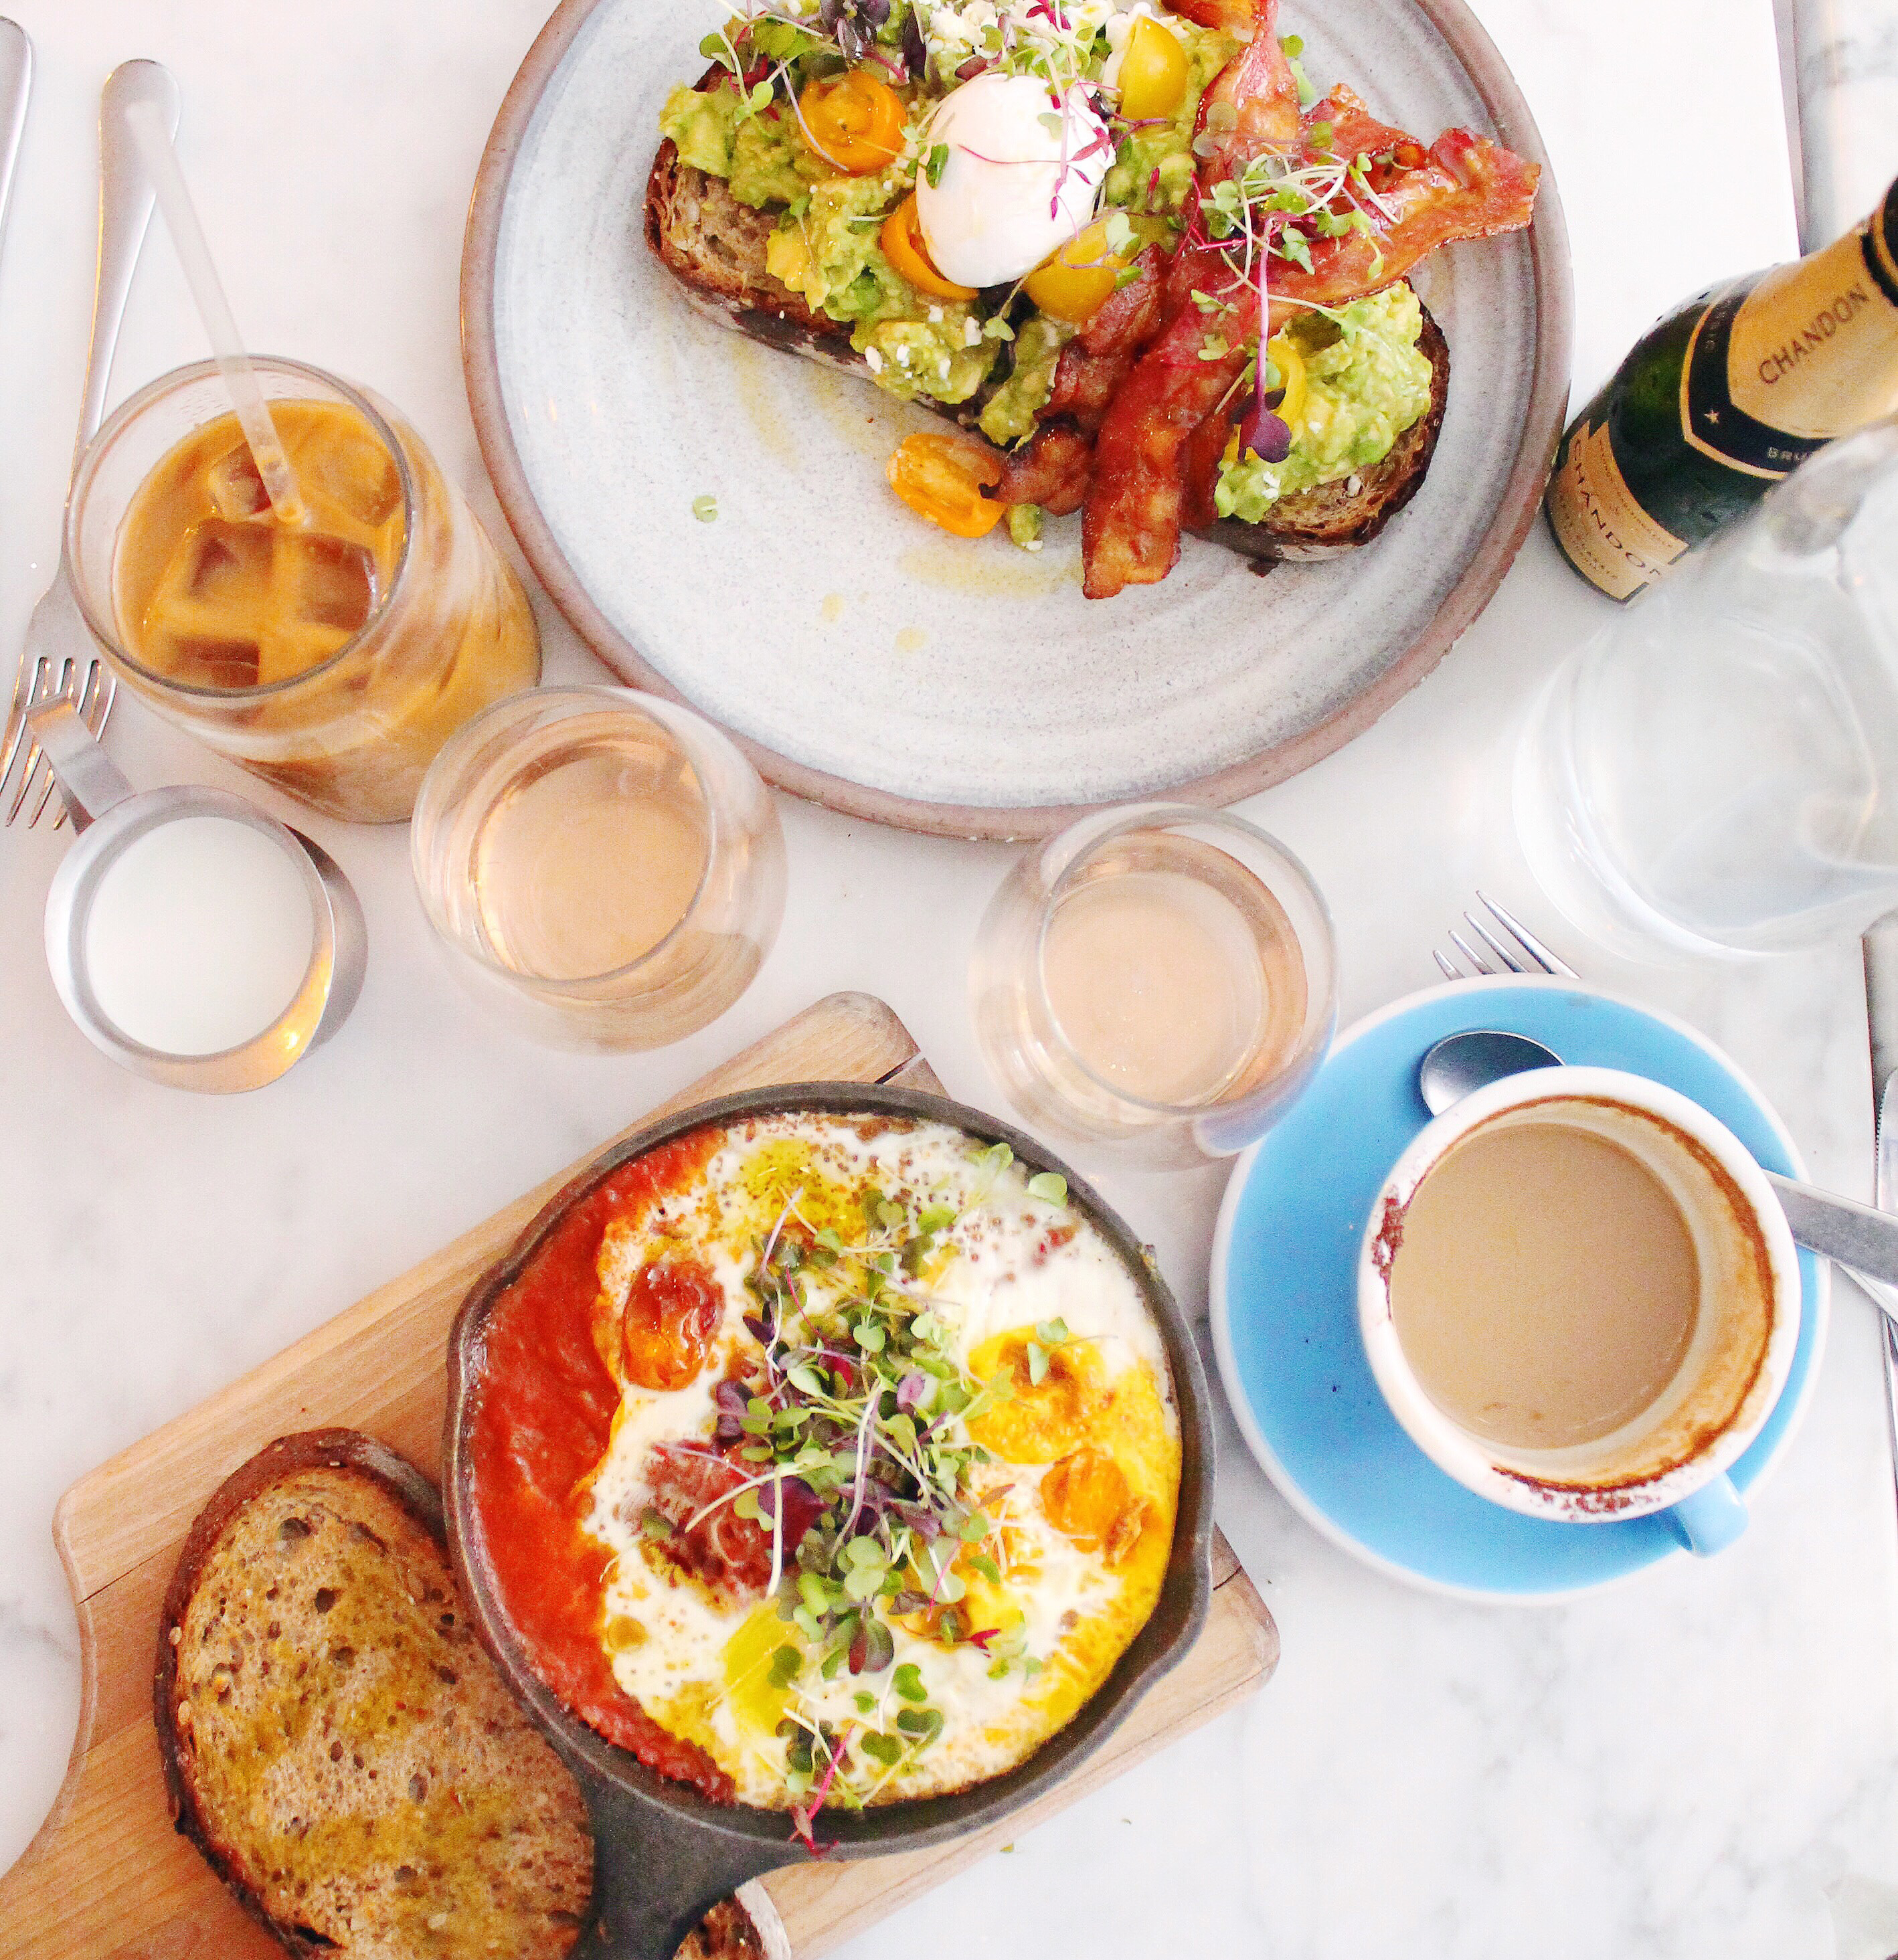 A must read! An NYC restaurant guide featuring all of New York City's best restaurants, from brunch to late night dinners. It even details key dishes to try at each restaurant! Bluestone brunch is a must!